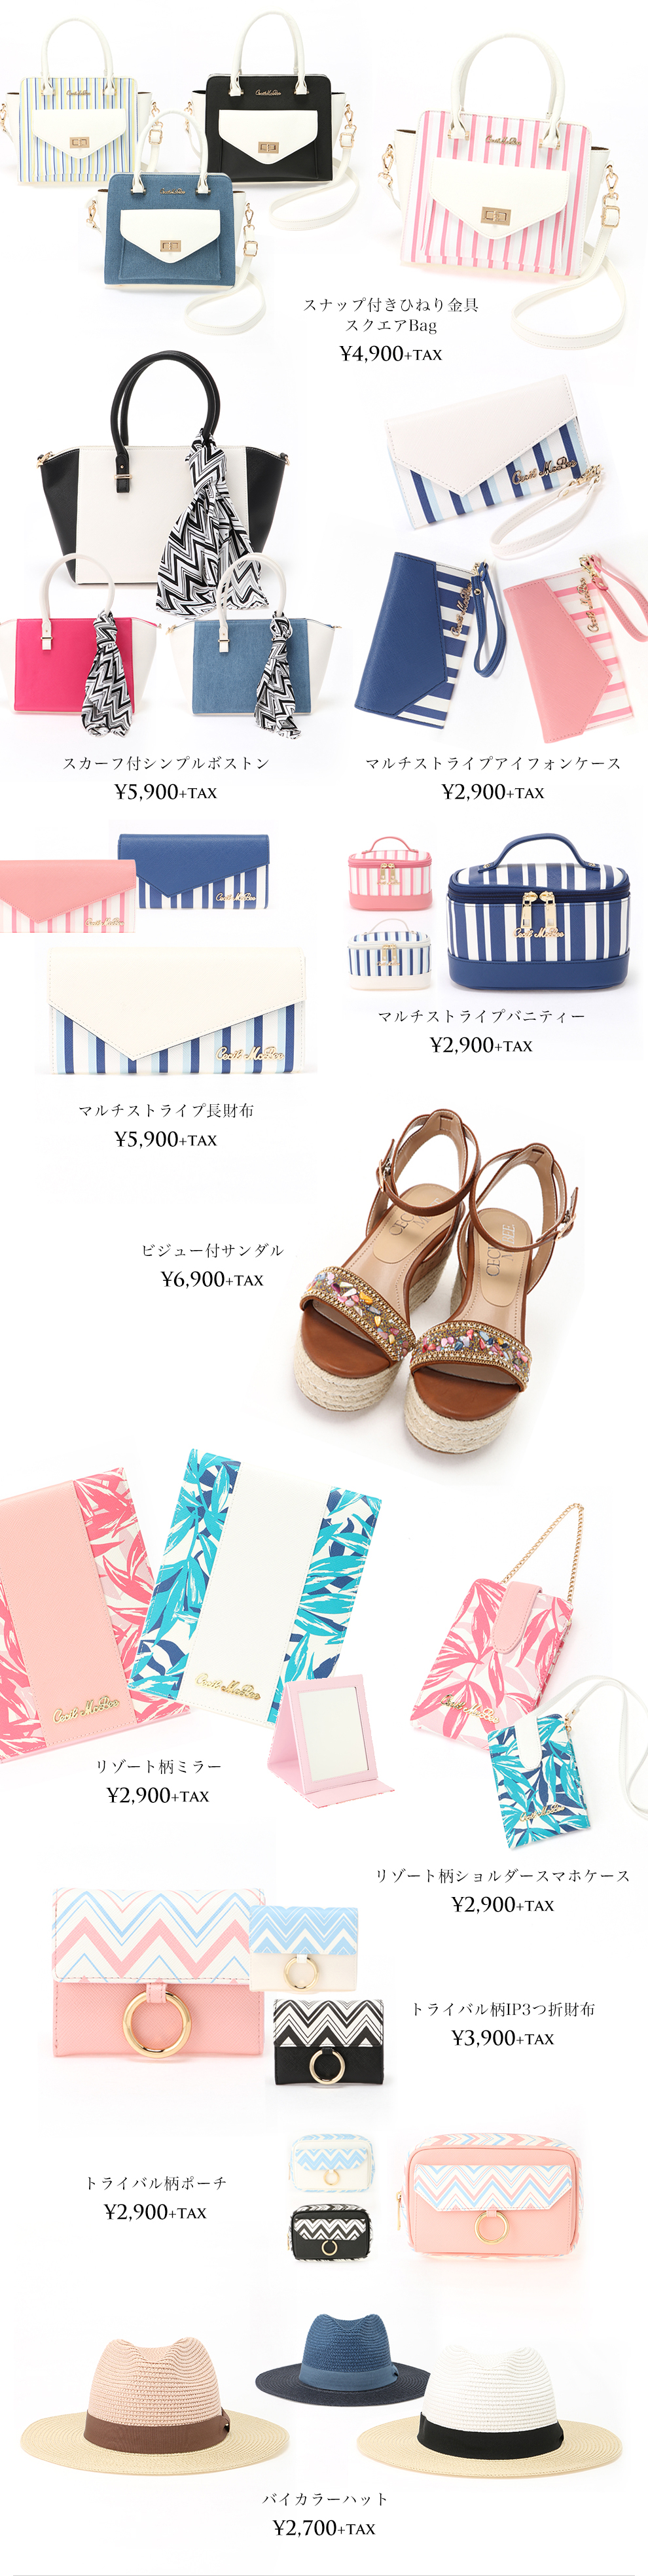 2017 Summer Goods&Shoes Collection